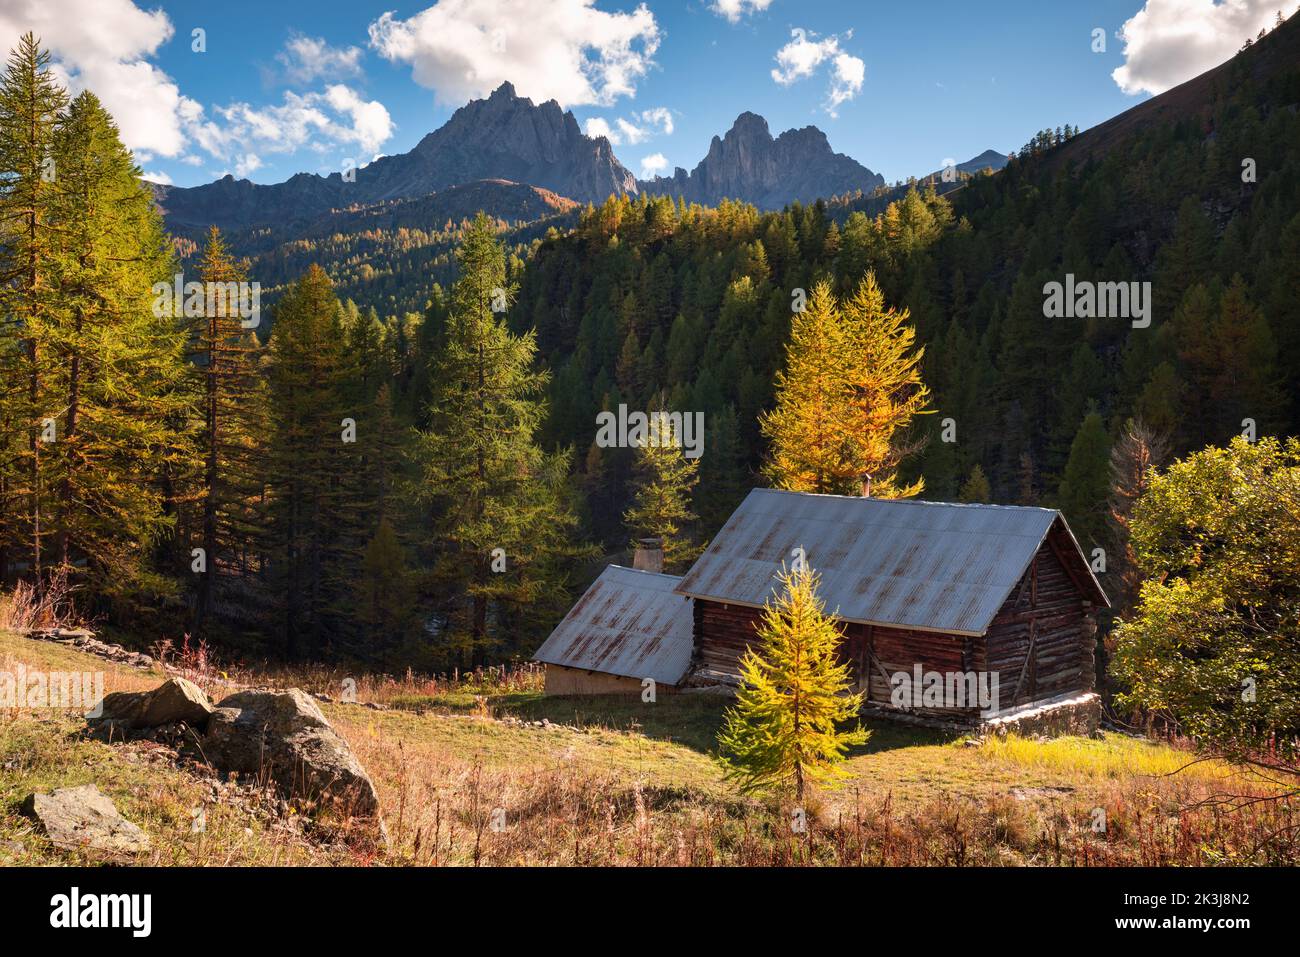 Claree Valley in the Cerces Massif with larch trees in full Autumn colors. Vallee de la Claree, Nevache, Hautes-Alpes, Alps, France Stock Photo